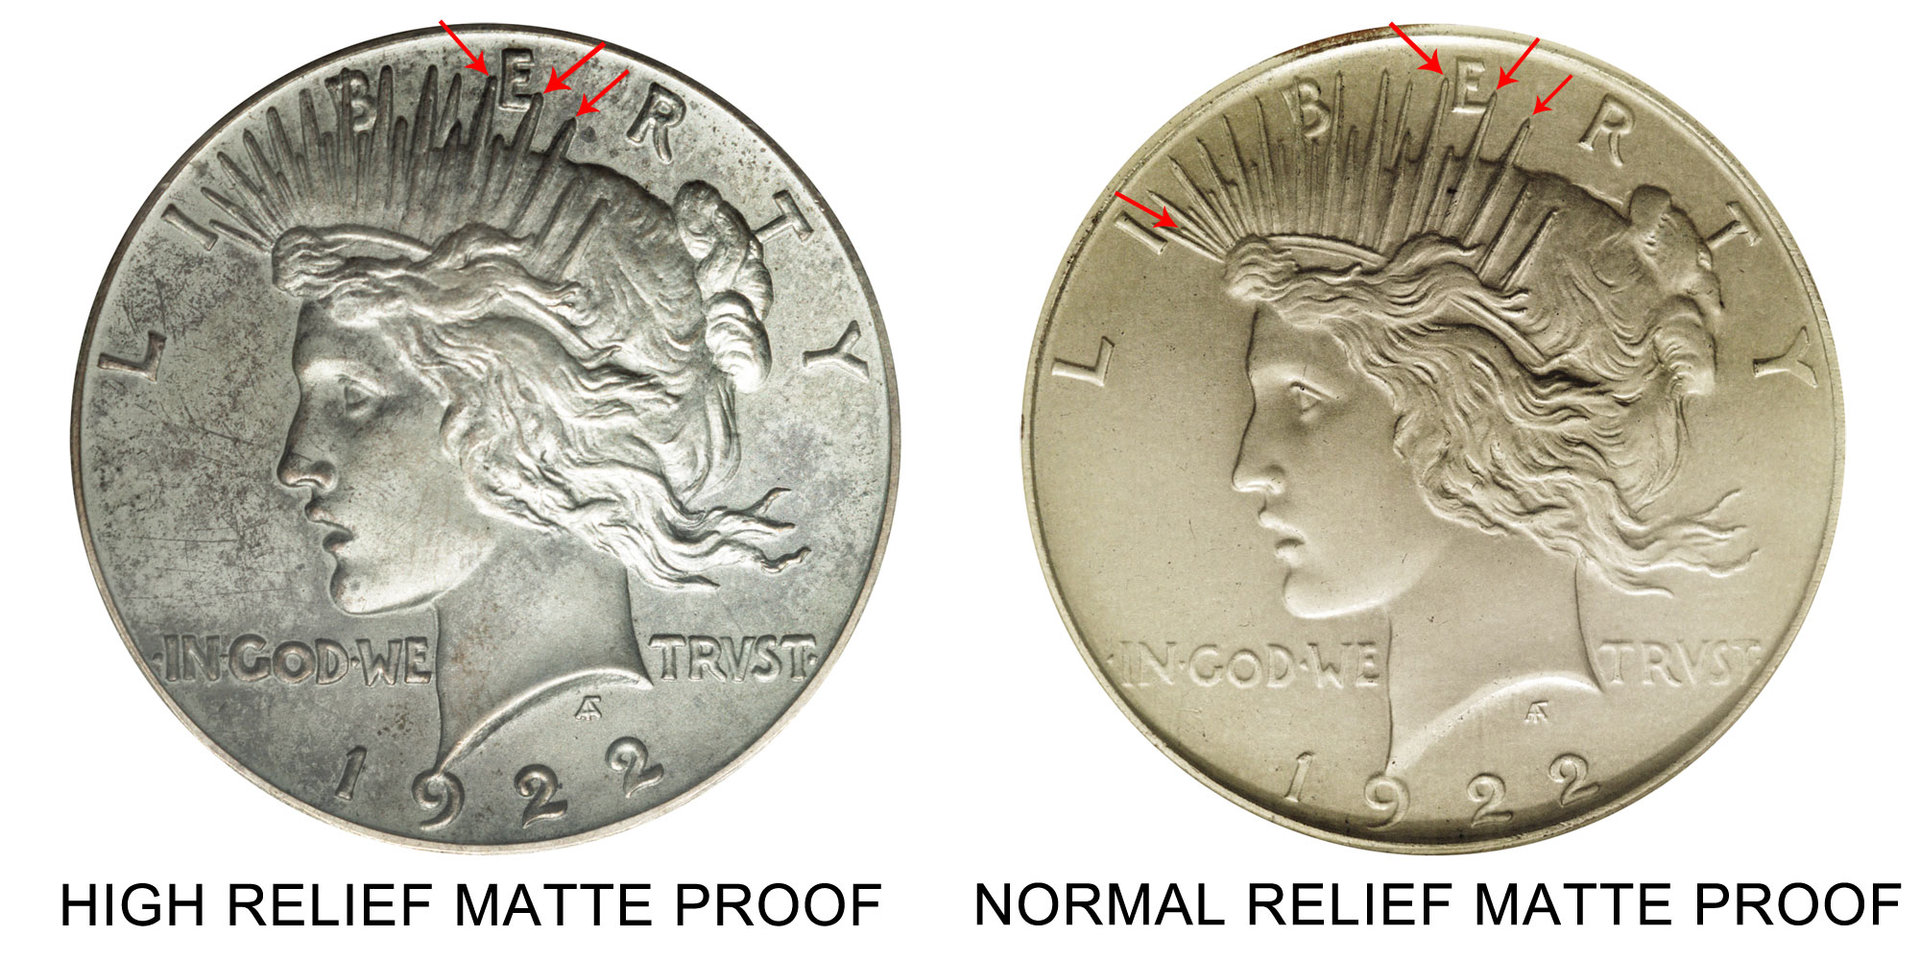 1922-obverse-high-relief-vs-normal-relief-peace-silver-dollar.jpg